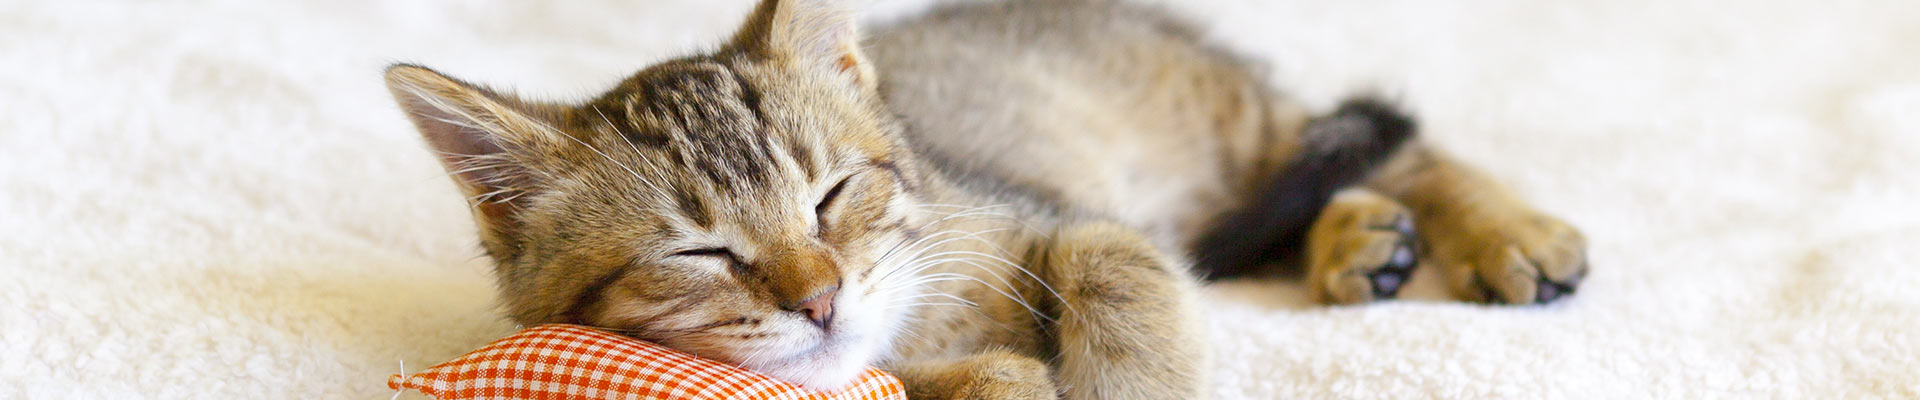 Kitten sleeping on bed with tiny pillow